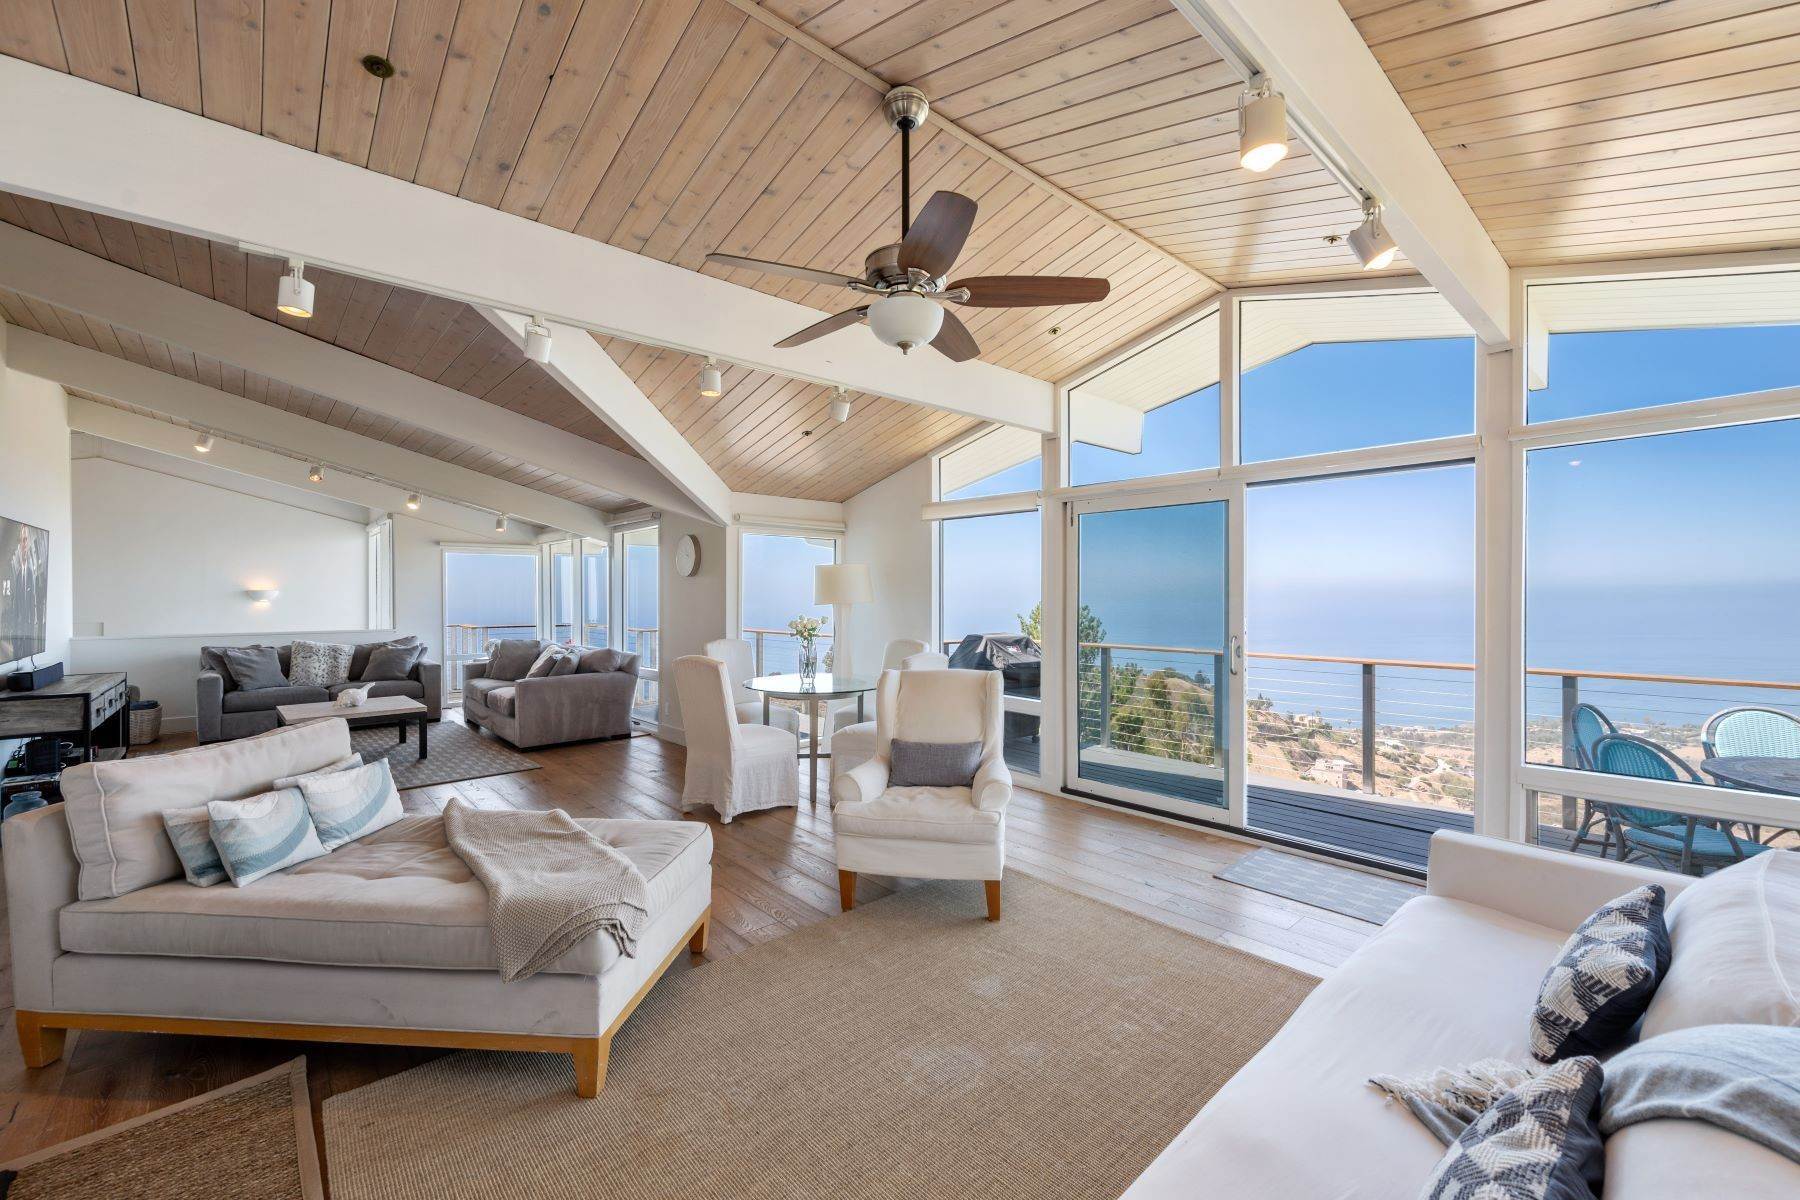 Single Family Homes for Sale at Stunning Ocean View Home 21825 Castlewood Drive Malibu, California 90265 United States